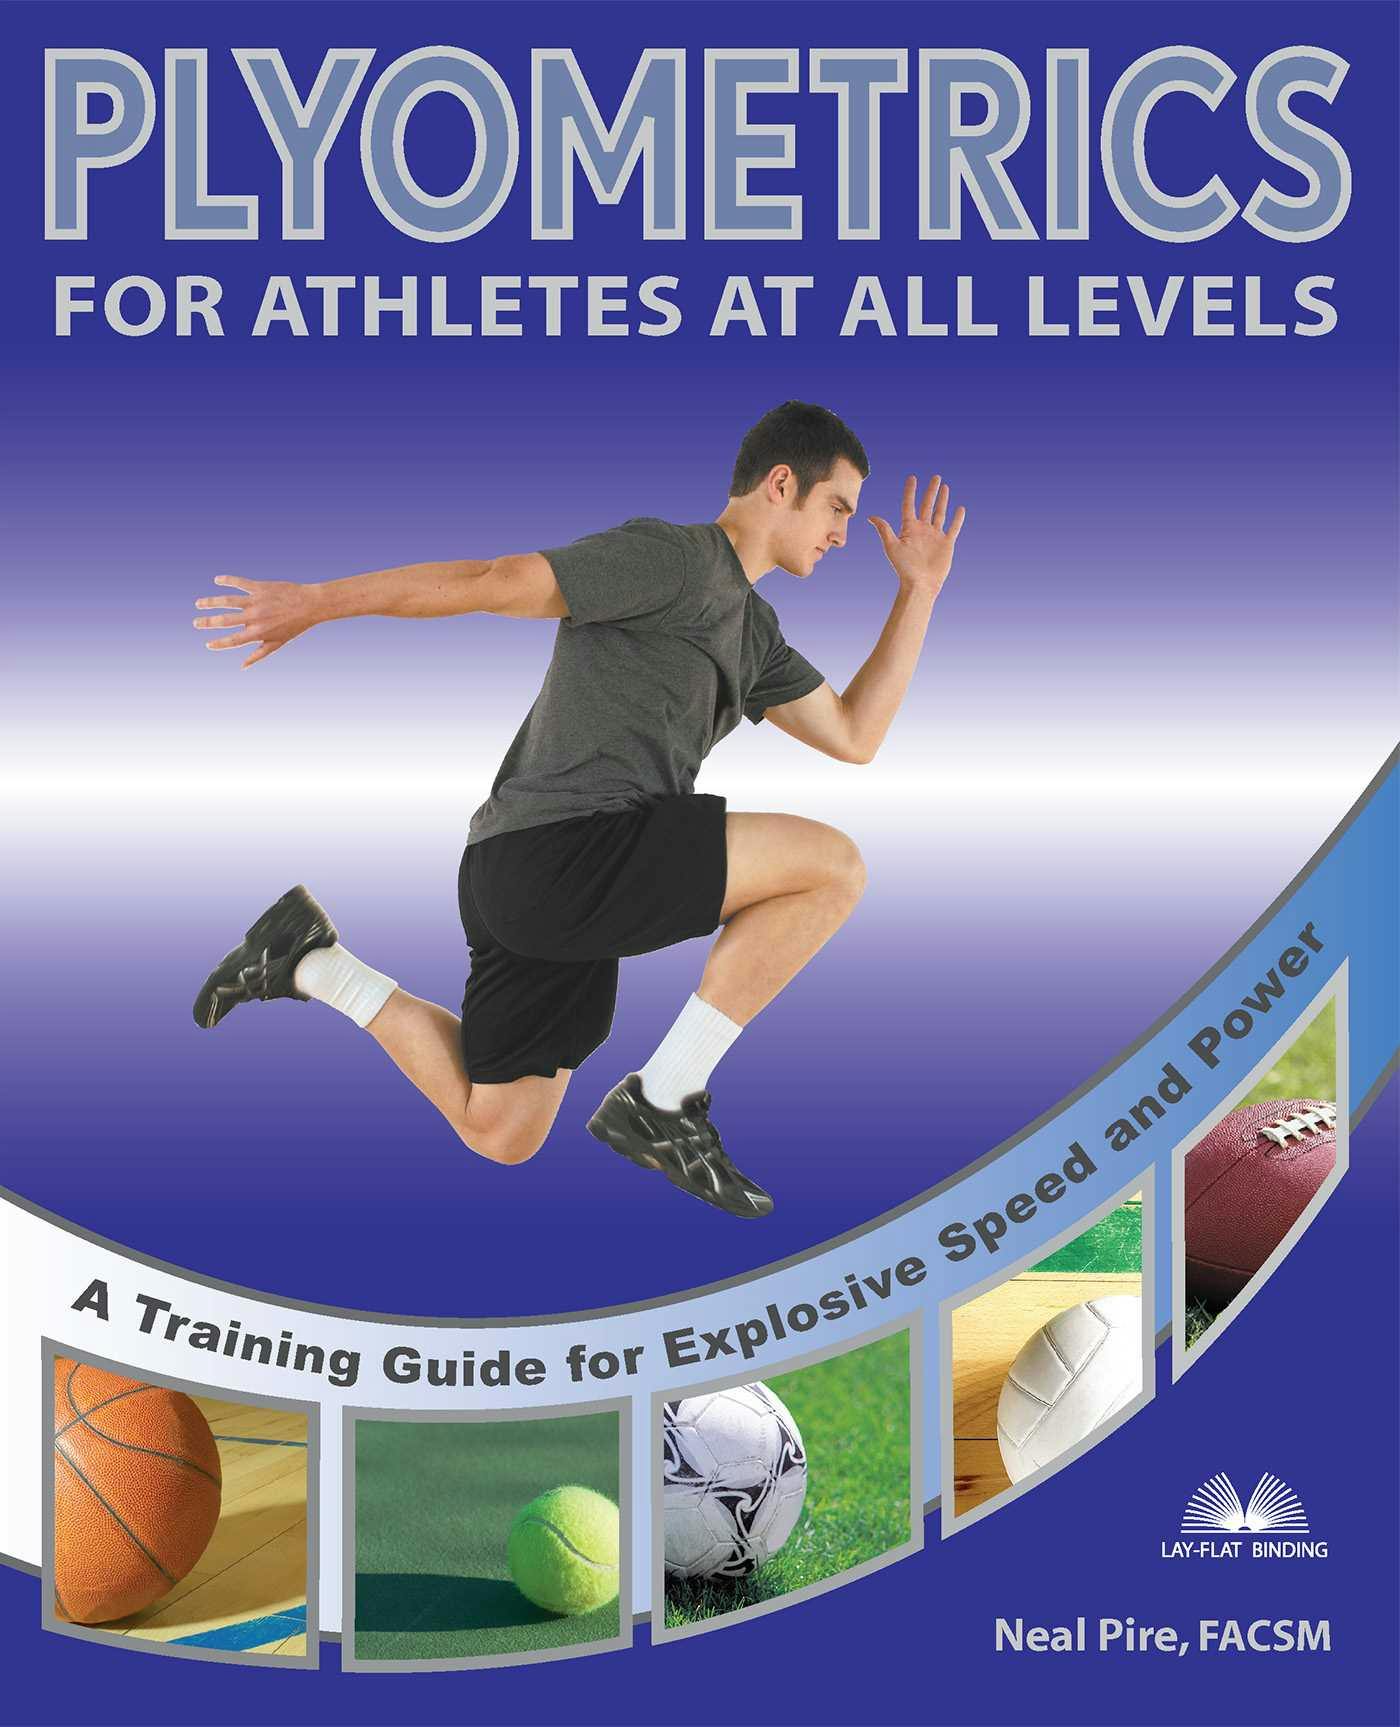 Plyometrics for Athletes at All Levels: A Training Guide for Explosive Speed and Power - Neal Pire